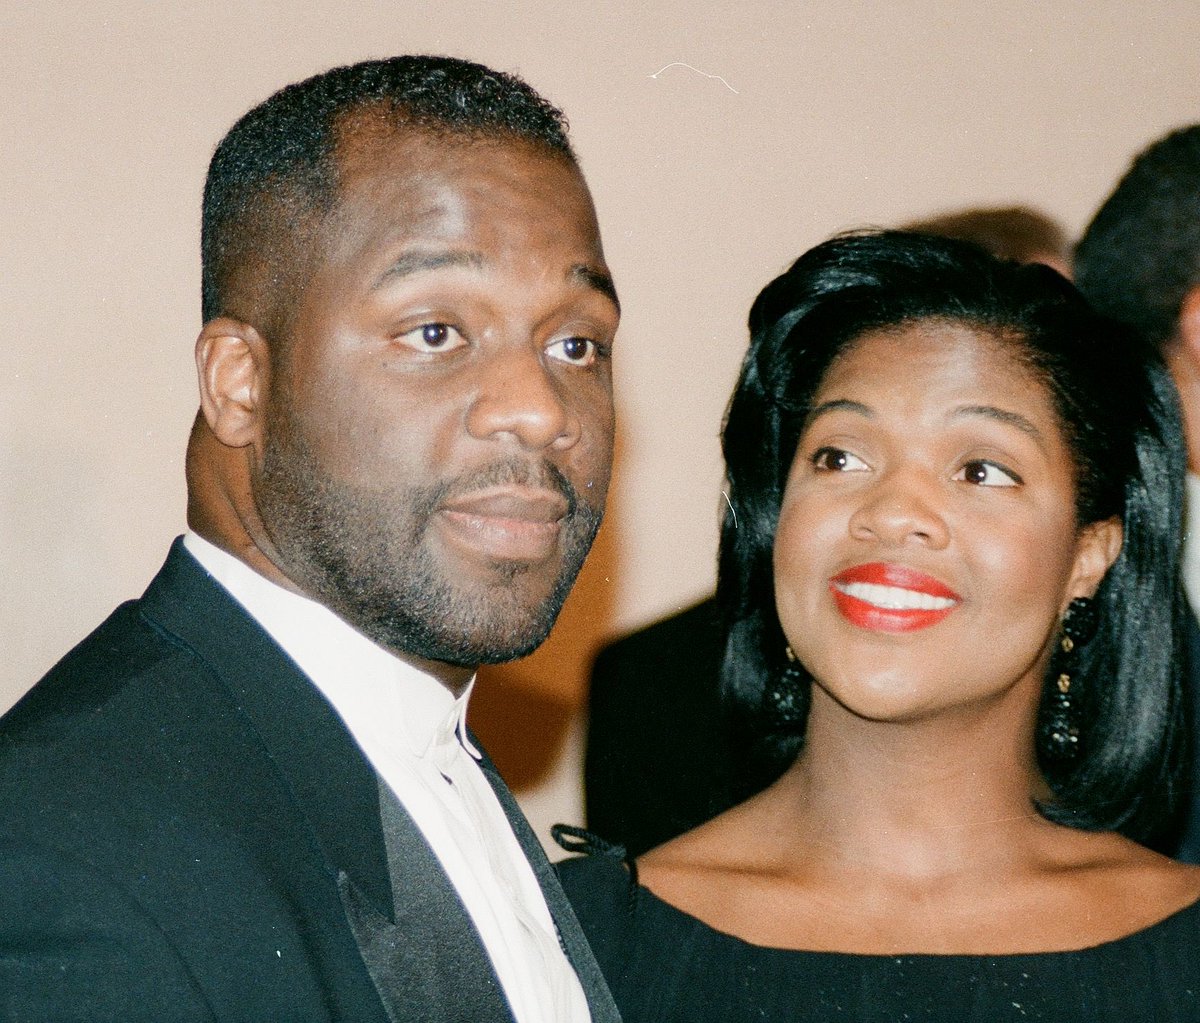 Bebe & CeCe Winans released a number of albums as a duet beginning in 1984. They released three No. 1 gospel albums together and have won several Grammys Awards. They were one of the first Black artists to receive significant airplay on contemporary Christian music radio.